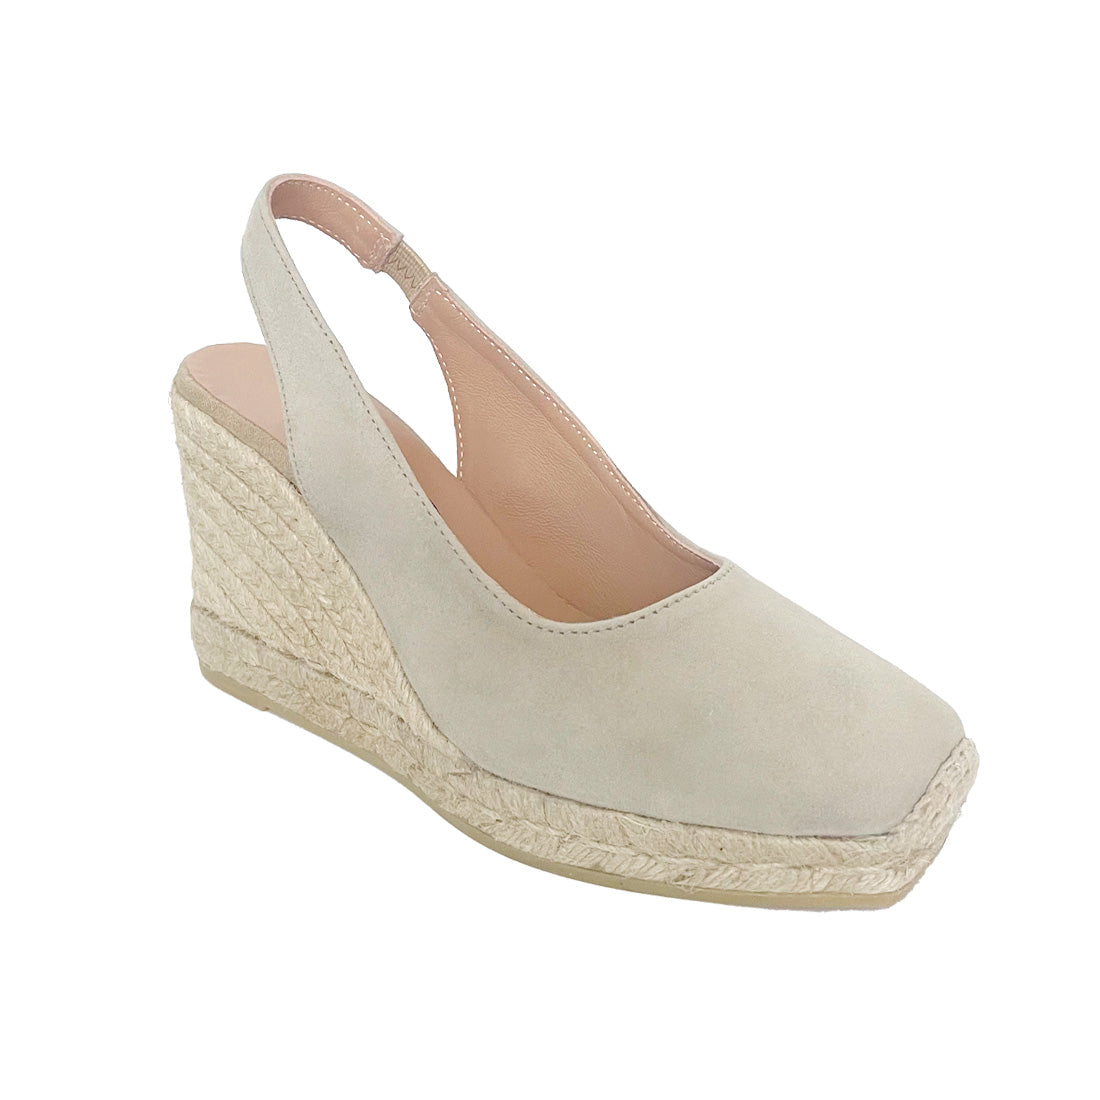 Nude espadrilles wedges handcrafted comfortable shoes